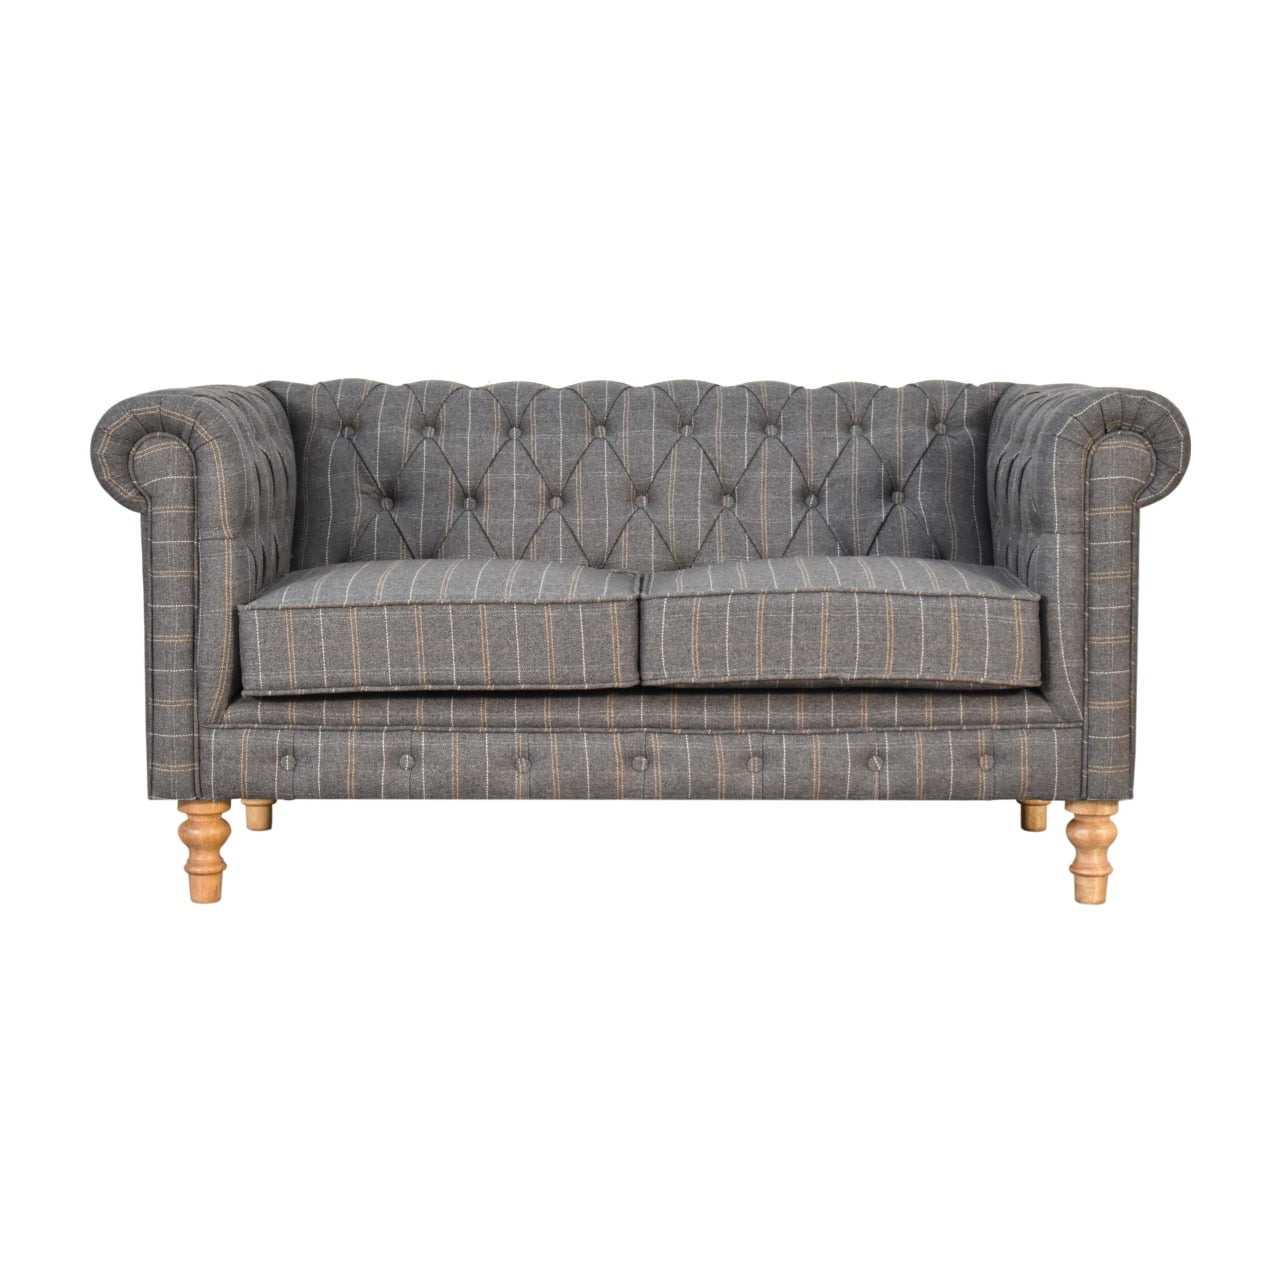 View Pewter Tweed 2 Seat Chesterfield Sofa information